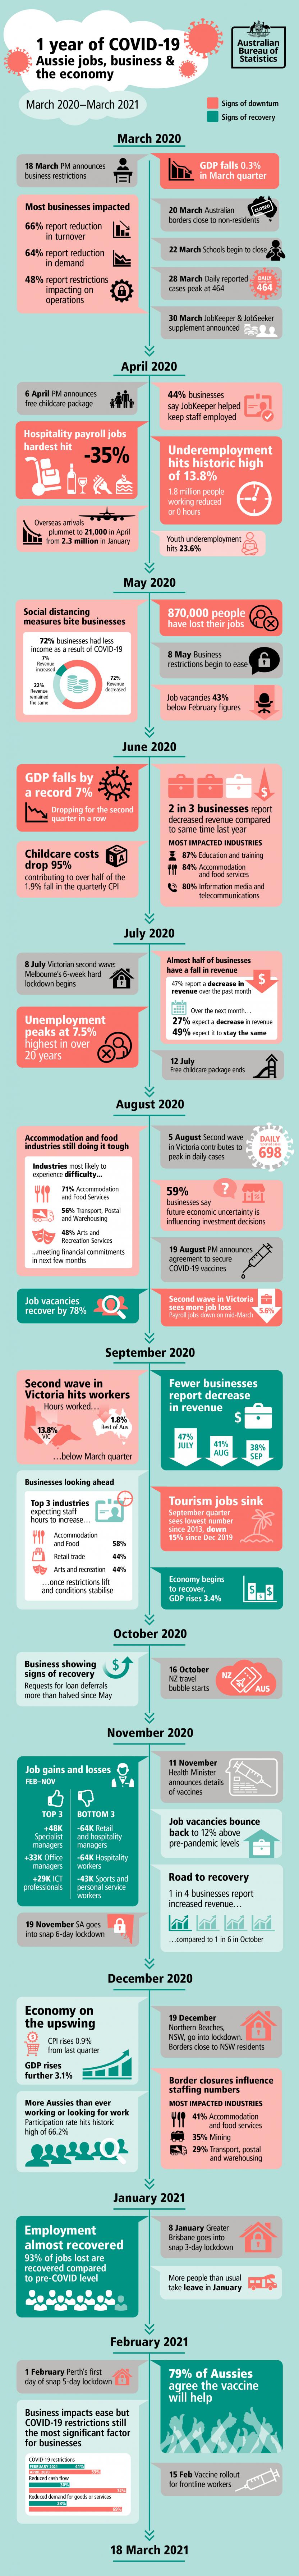 Heading: One year of COVID-19 - Aussie jobs, business and the economy Timeline from March 2020 to March 2021 Subheading: March 2020 18 March, Prime Minister announces business restrictions. GDP falls 0.3% in March quarter. Source: Australian National Accounts: National Income, Expenditure and Product. 20 March, Australian borders close to non-residents. 22 March, School begin to close. 28 March, Daily reported cases peak at 464. 30 March, JobKeeper and JobSeeker supplement announced. Most businesses im